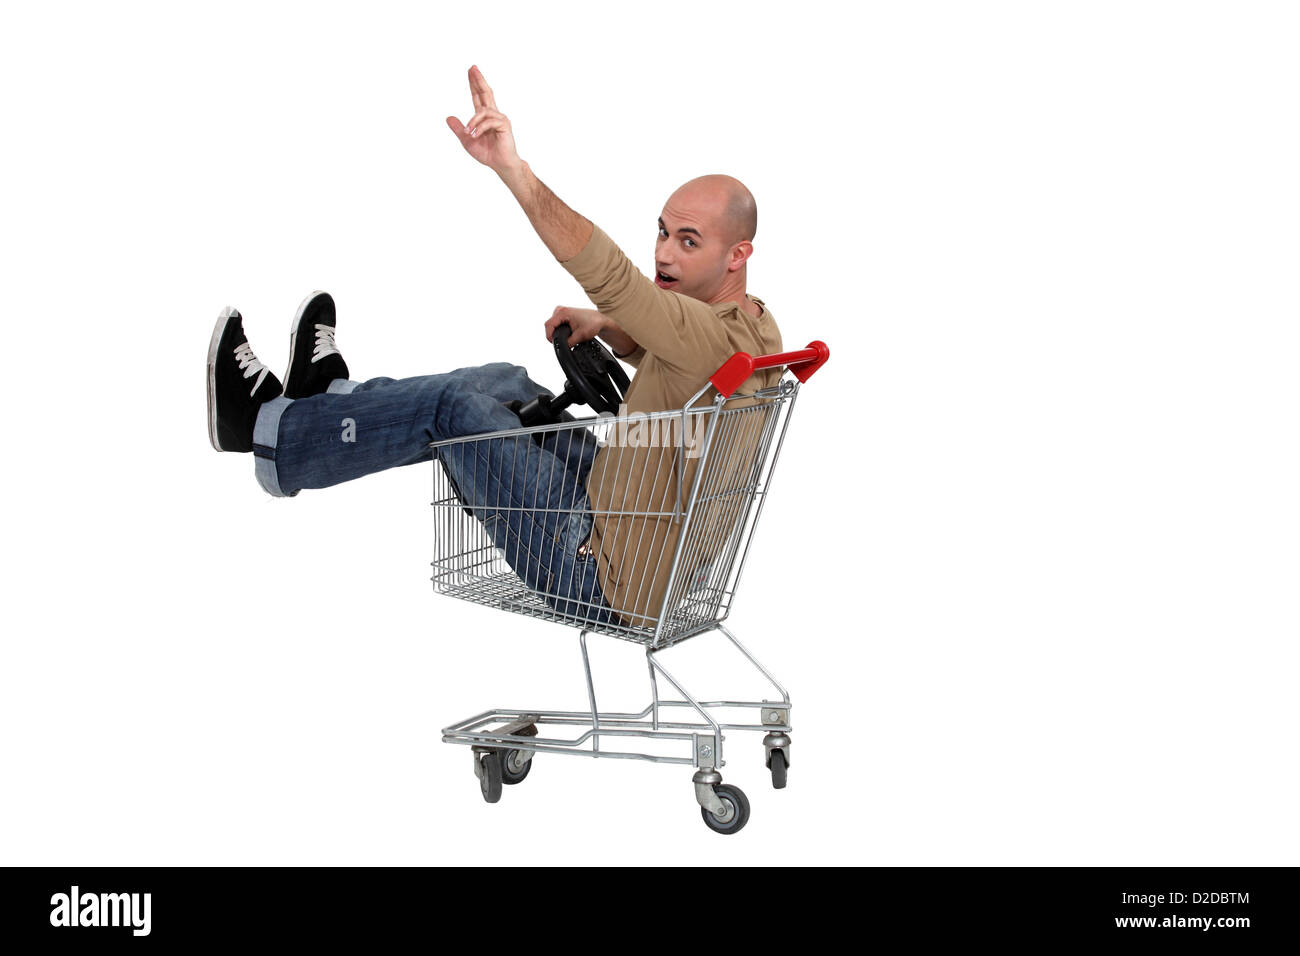 Man in a shopping trolley Stock Photo